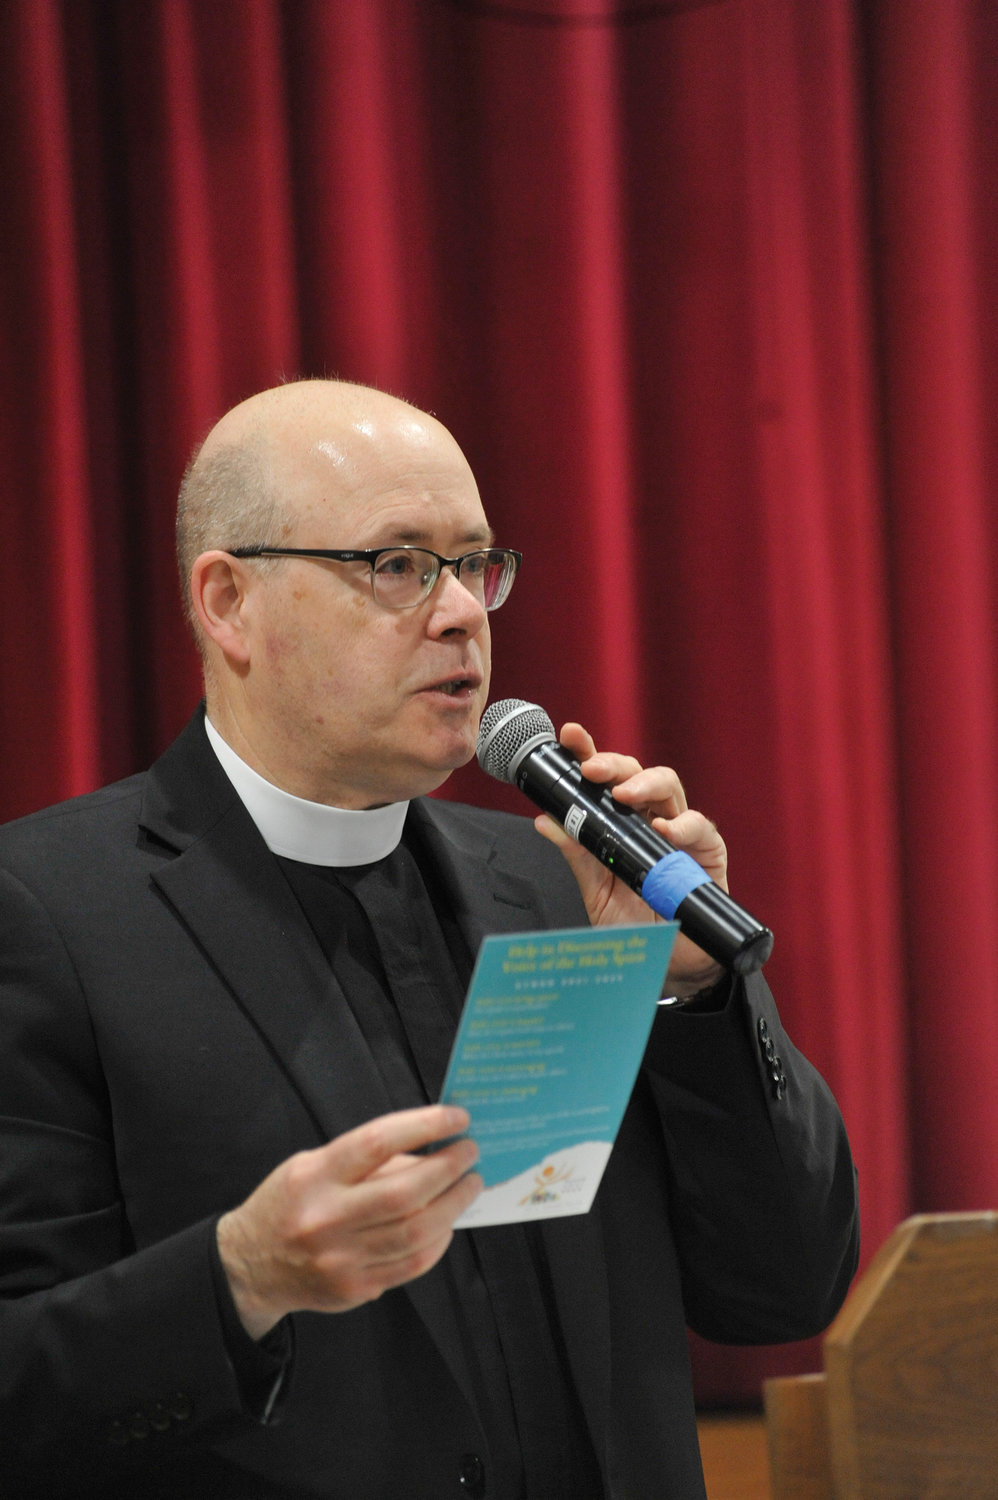 Father Joseph McLafferty, pastor of St. Kateri Tekakwitha in LaGrangeville and dean of Dutchess/Putnam counties, speaks to the participants in the listening session at St. Denis-St. Columba School in Hopewell Junction March 19.